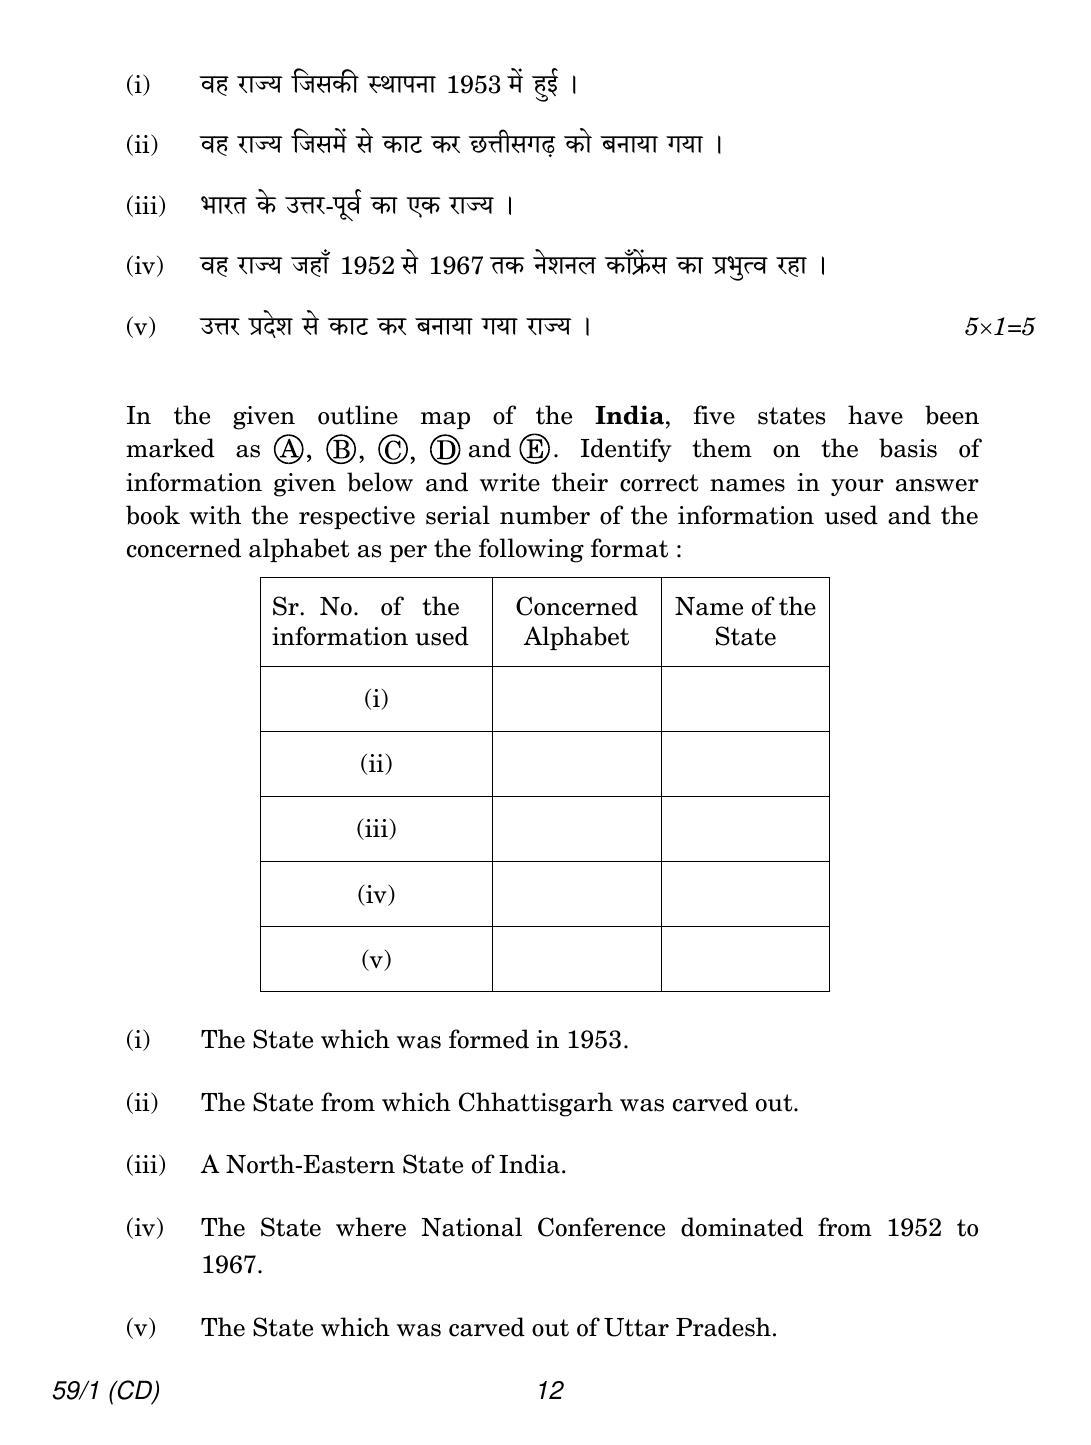 CBSE Class 12 59-1 POLITICAL SCIENCE CD 2018 Question Paper - Page 12